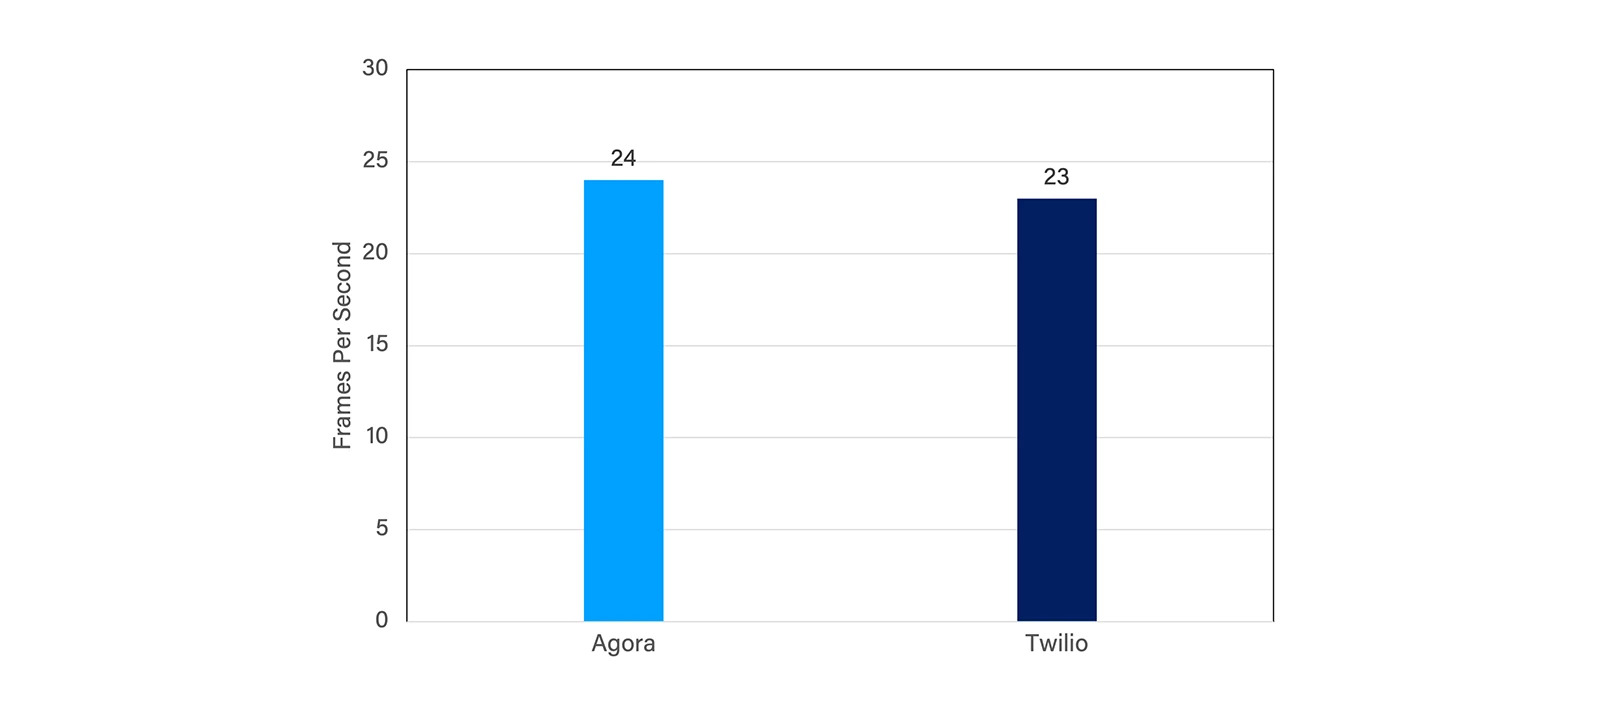 Figure 1: FPS comparison for Agora and Twilio under a normal network condition.